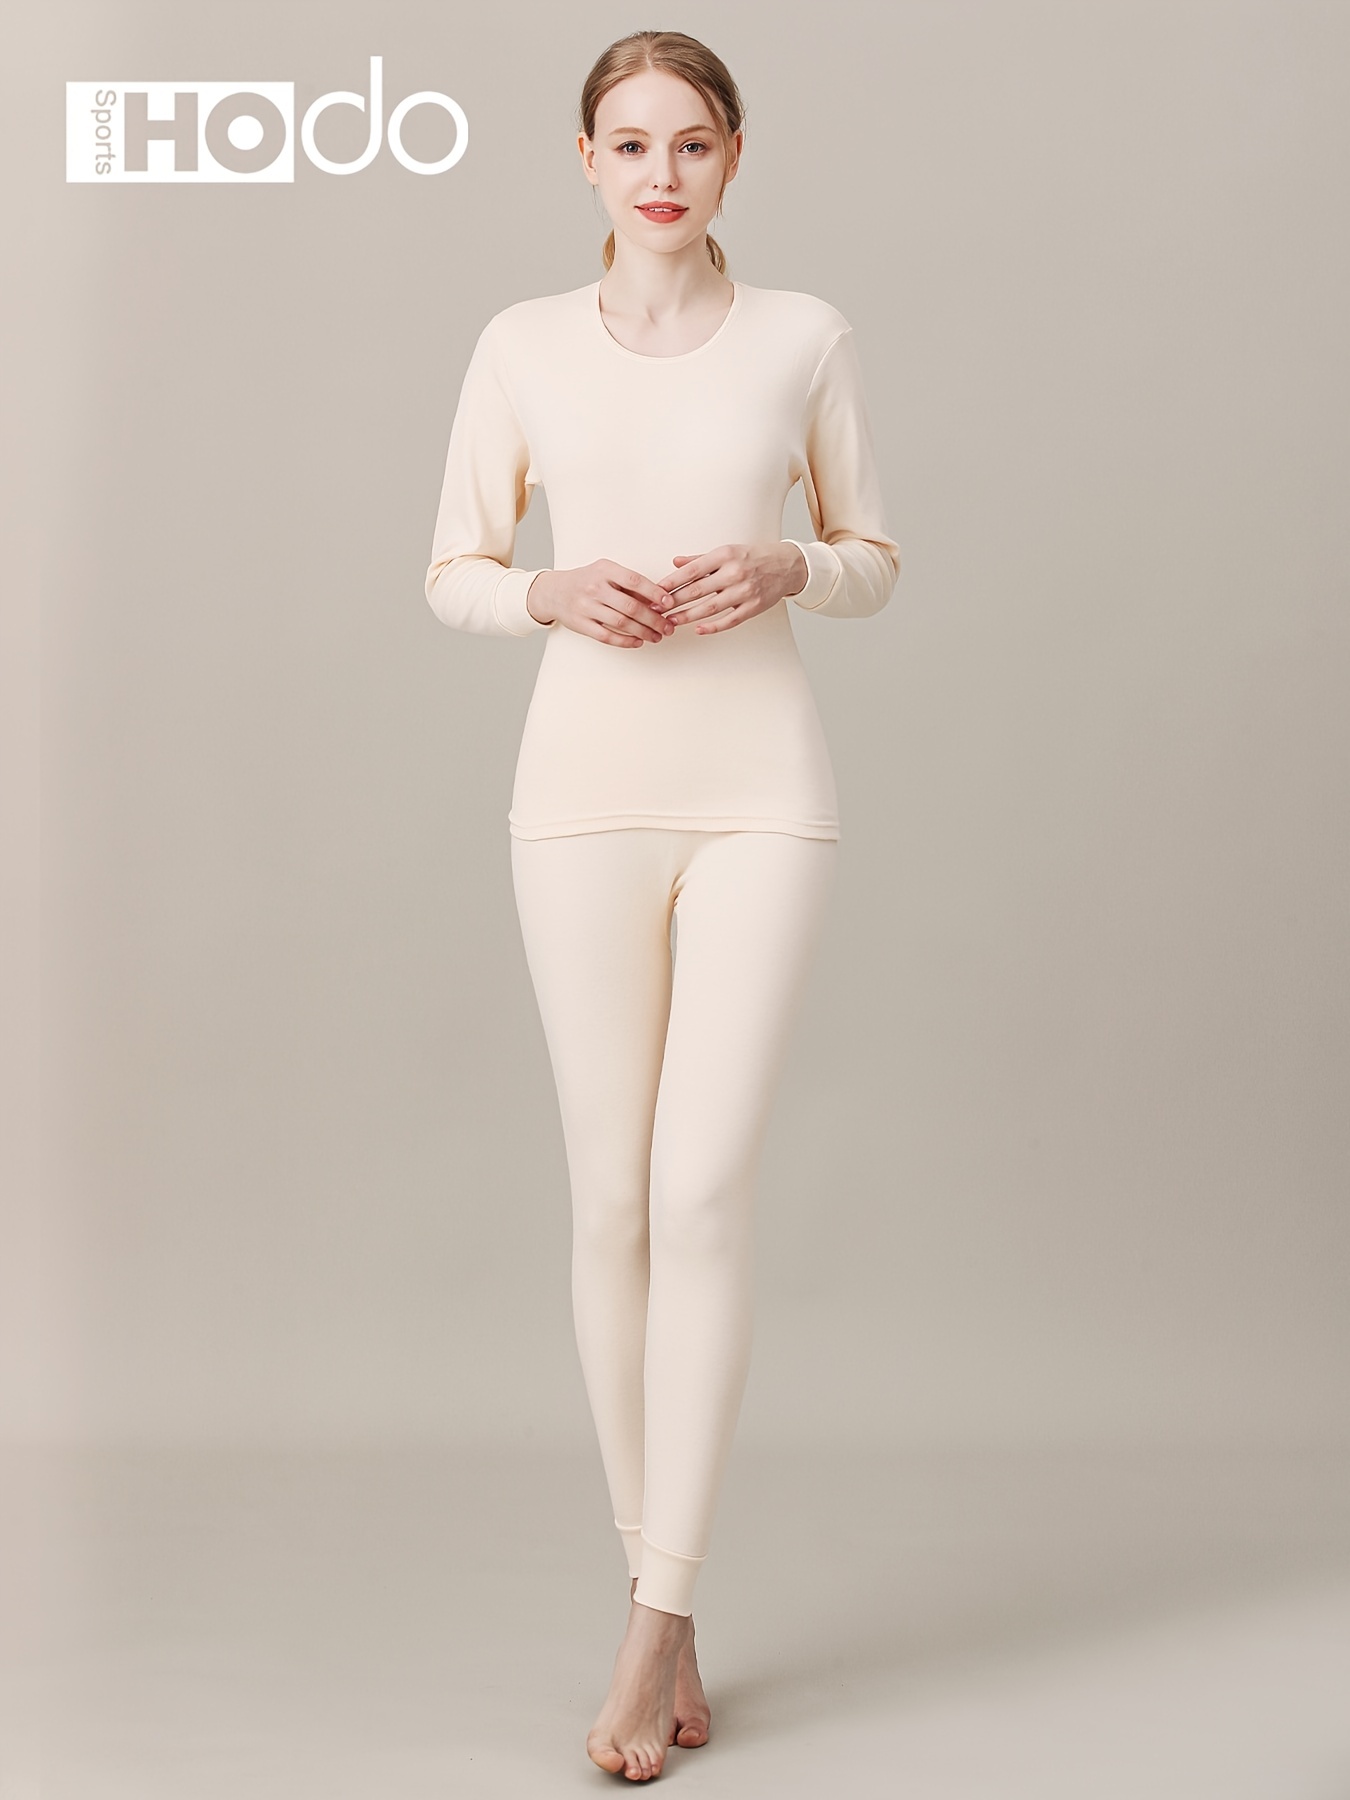 Thermal Underwear for Women Thermal Long Johns Set Top & Pants